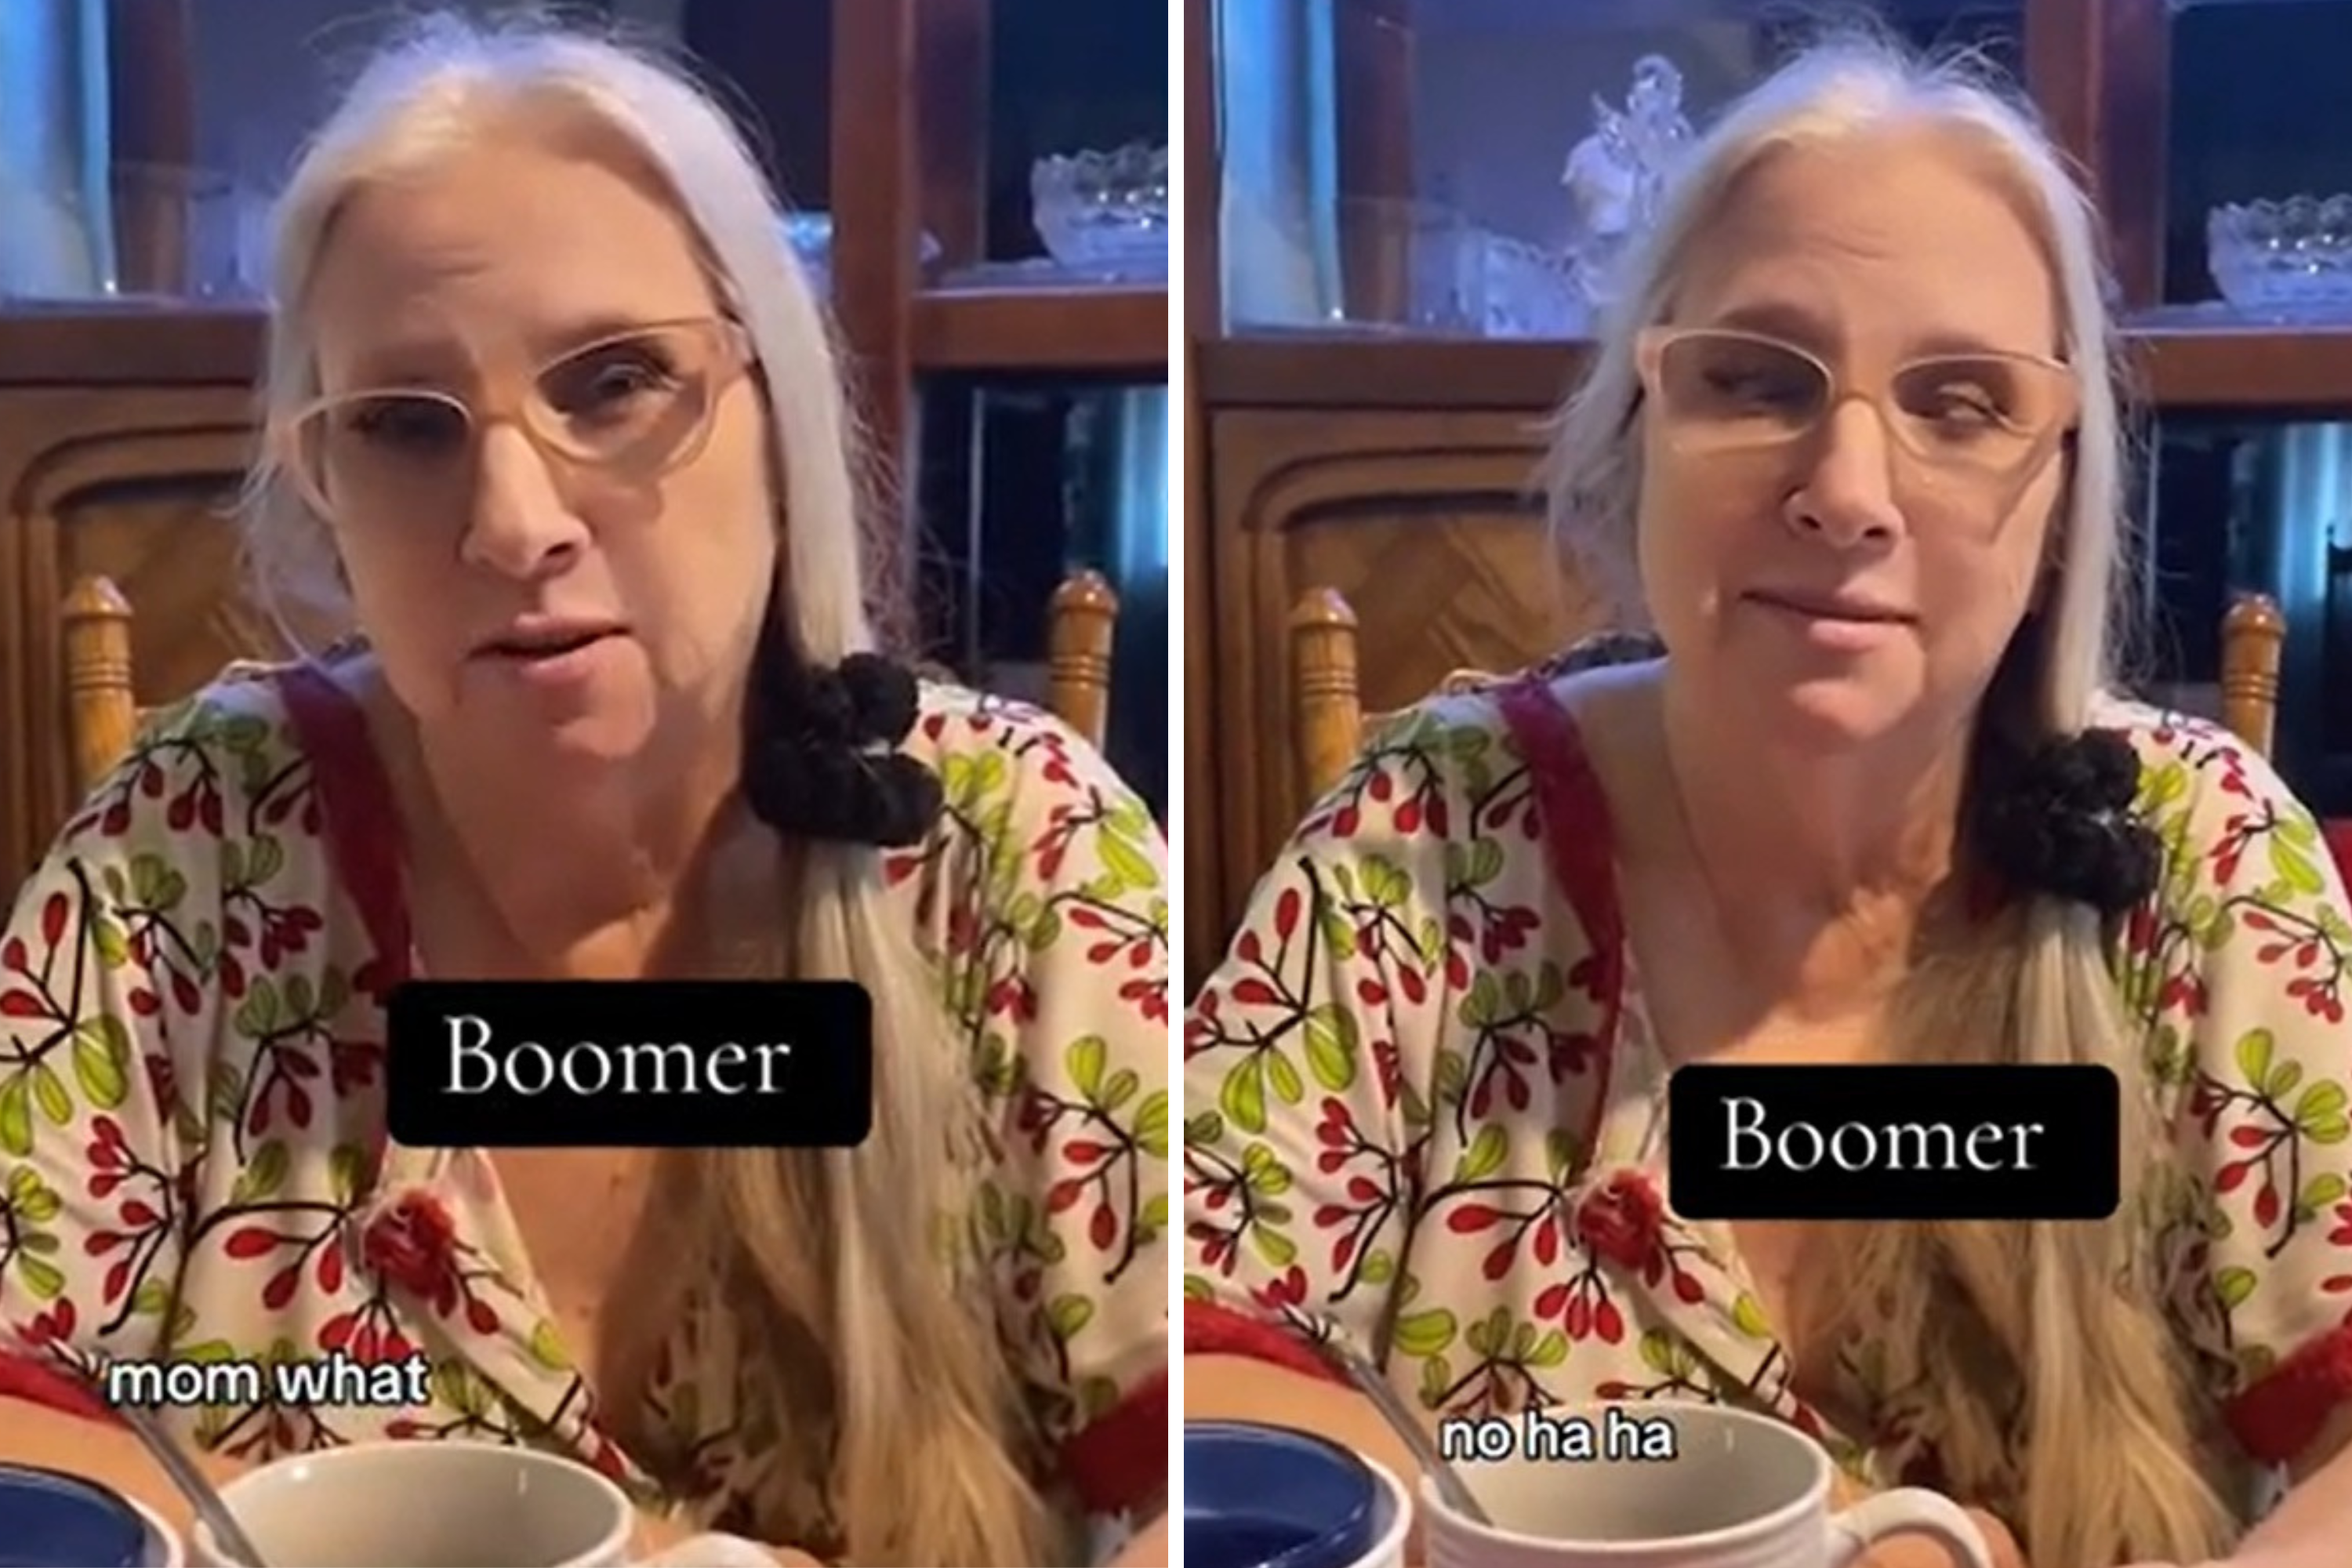 Boomer mom shocks daughter with 1970s parenting detail- 'I'm dying'